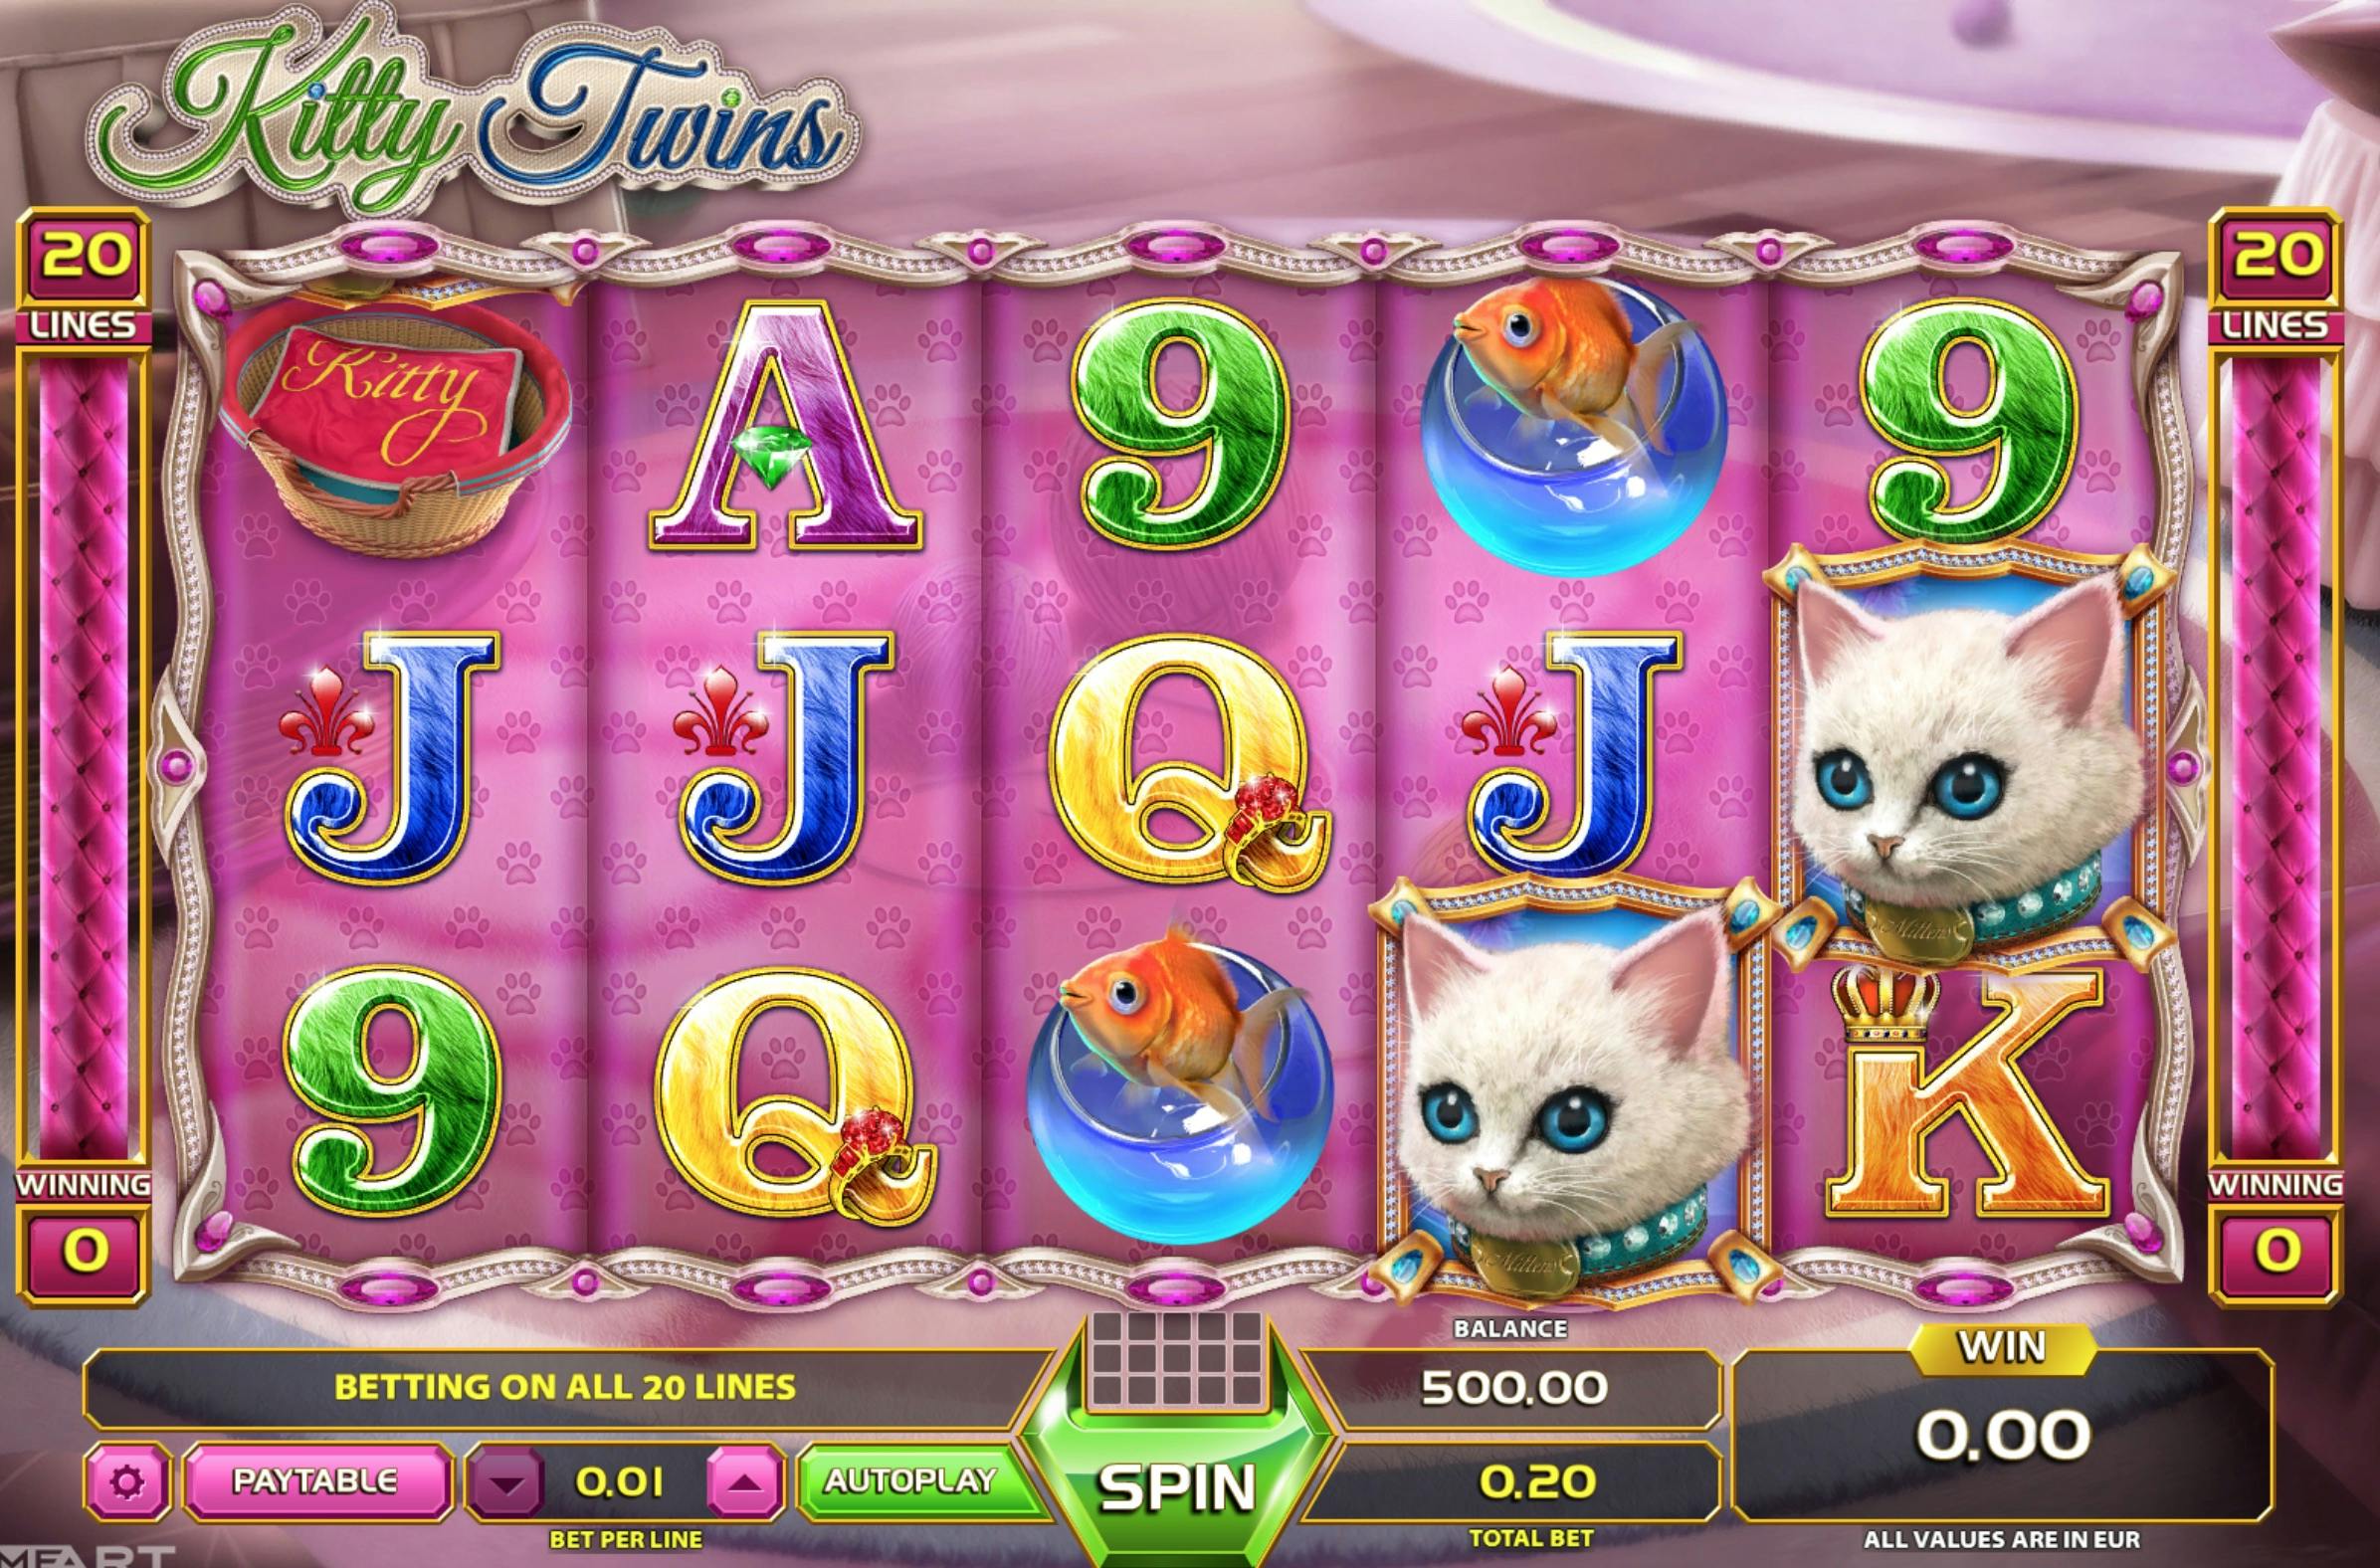 William hill slots free spins